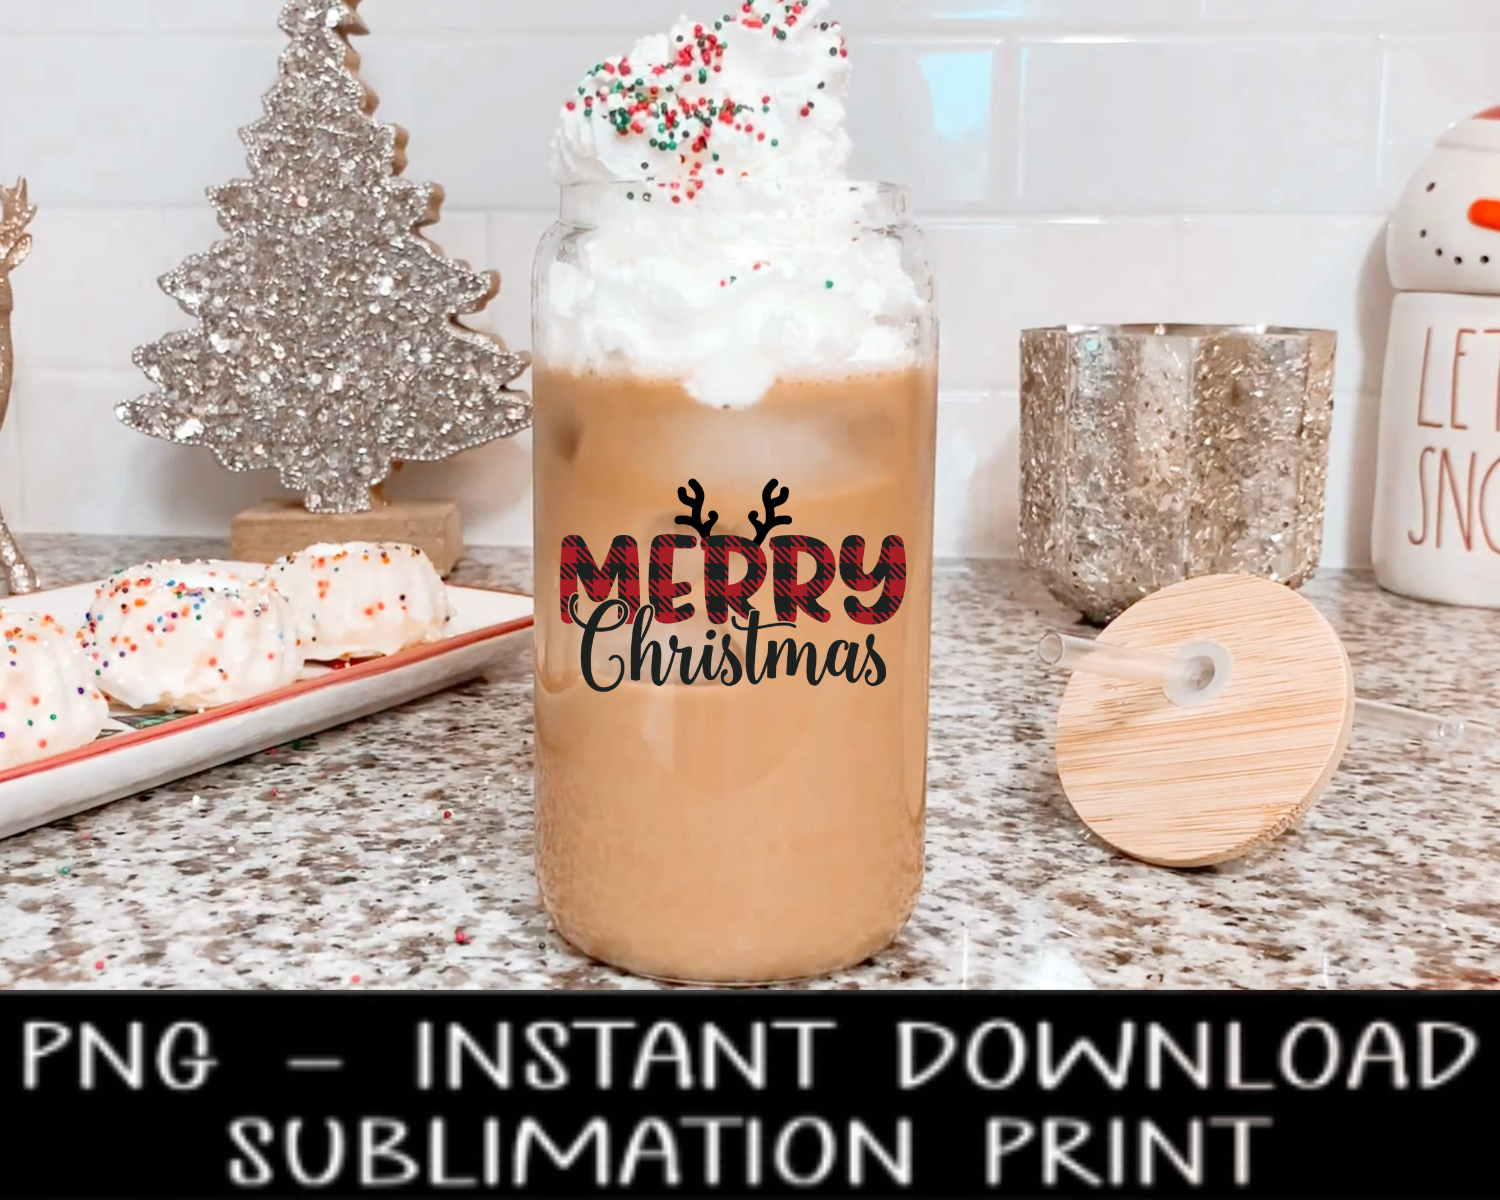 Christmas PNG, Christmas Plaid UV DtF File, Christmas Iced Coffee Glass PNG Digital Design, Sublimation PnG, Instant Download Water Slide PnG